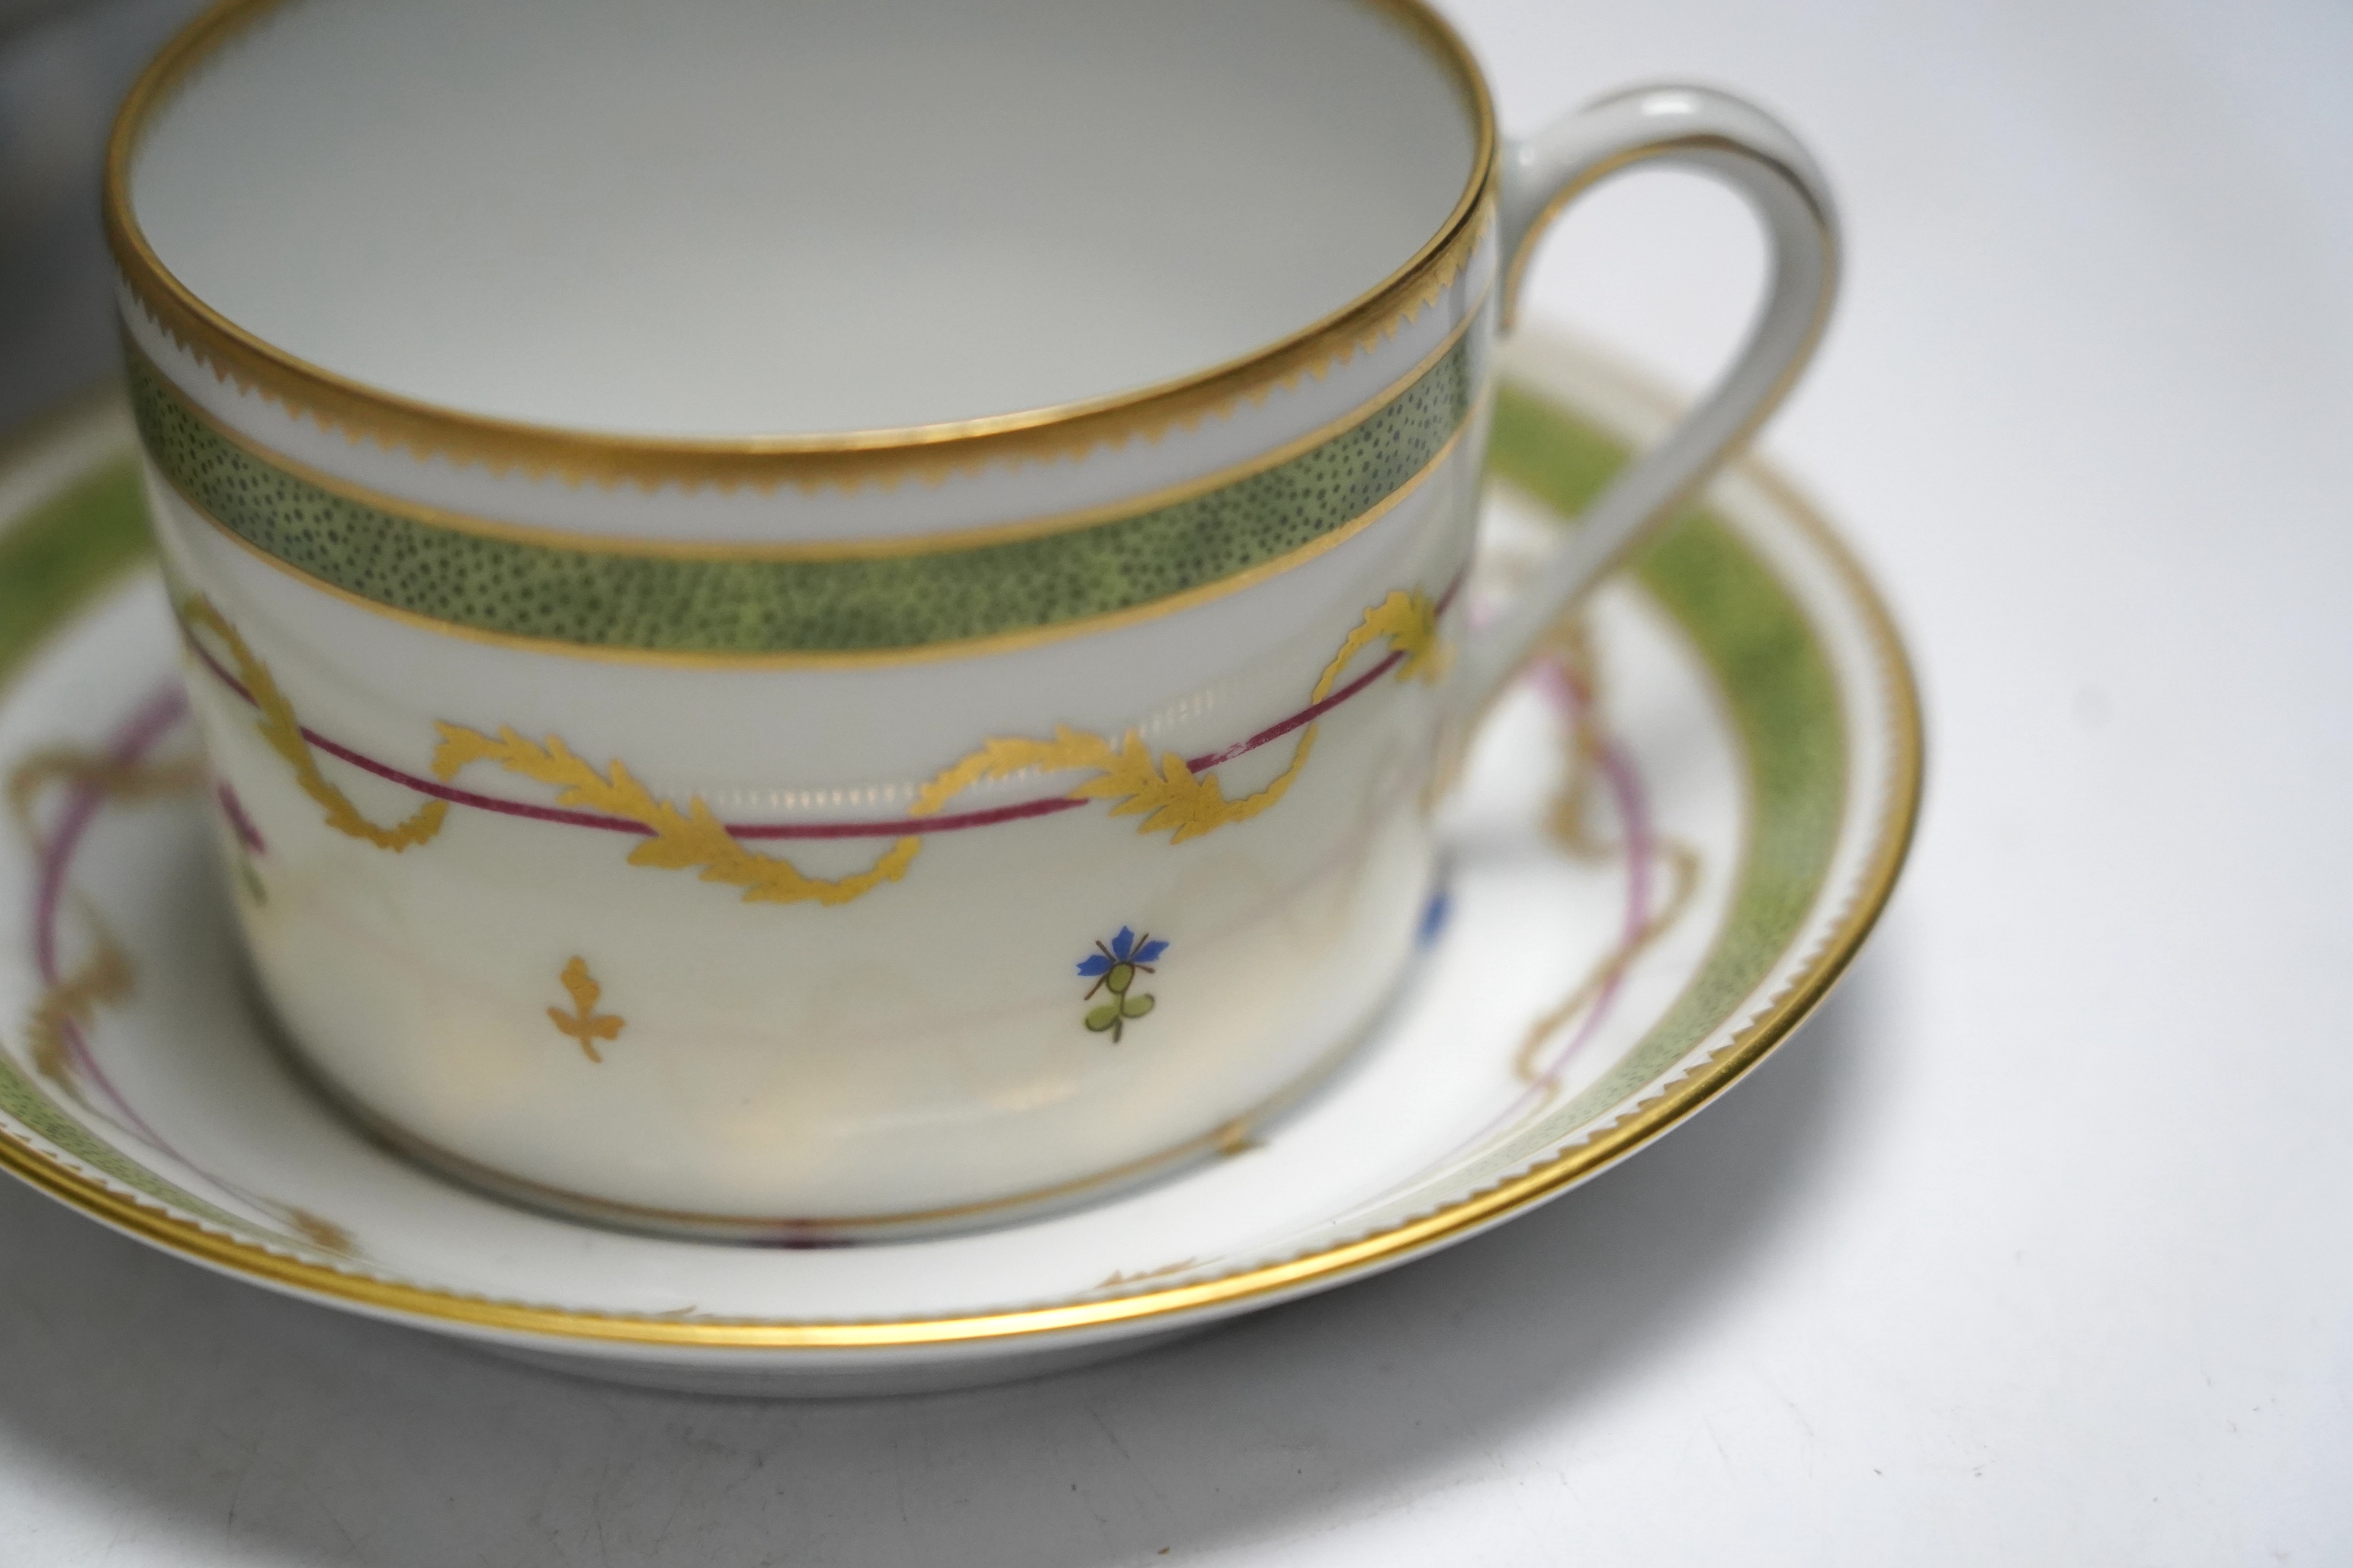 A ‘Haviland’ Limoges coffee and dinner service